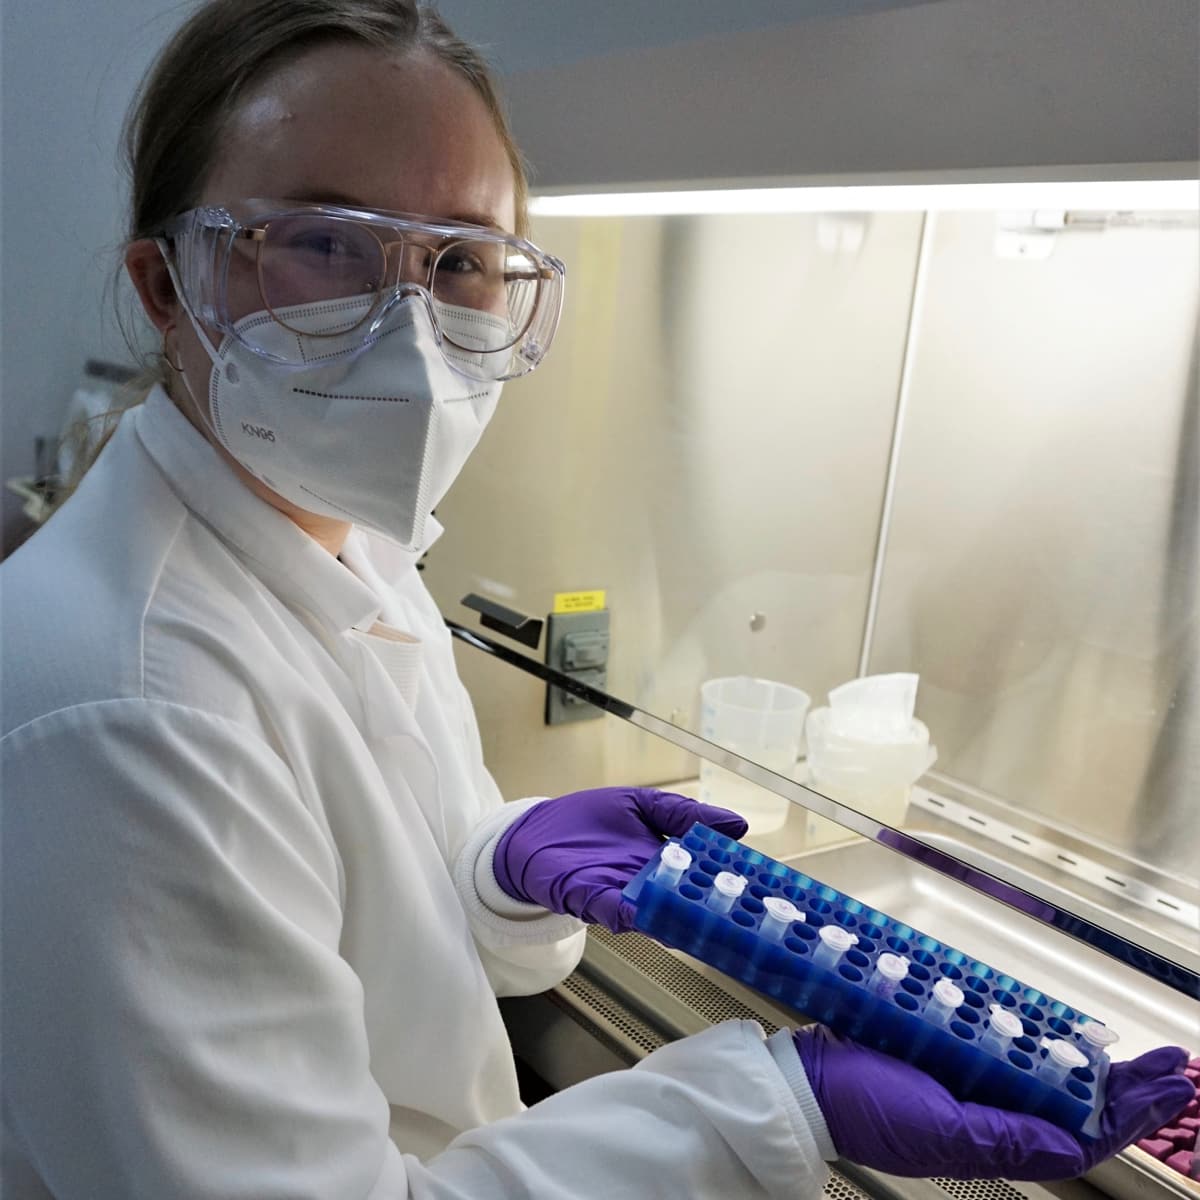 Natasha Sushenko processes samples in the Environmental Microbiology Lab at the Desert Research Institute during a COVID-19 wastewater monitoring study.